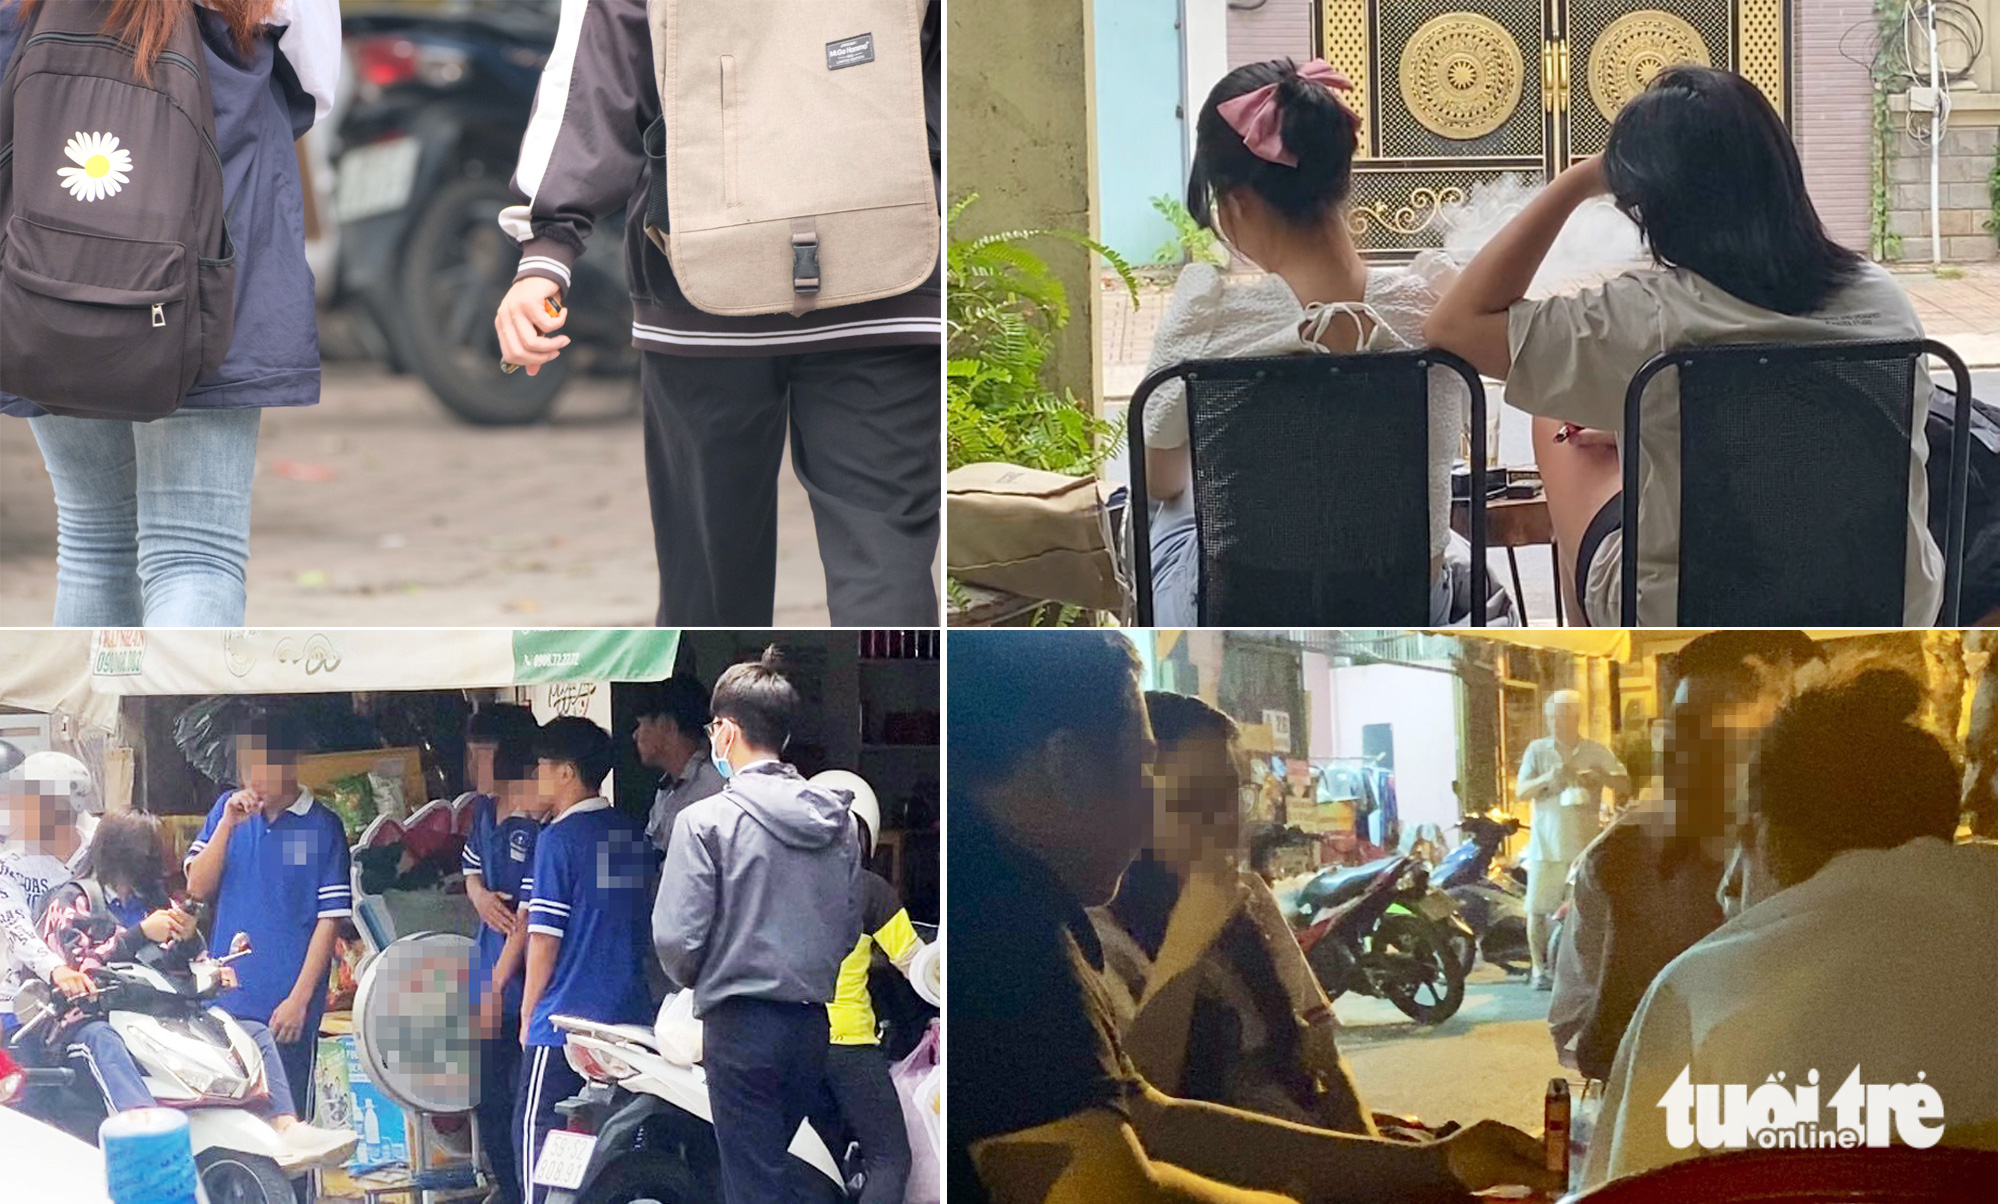 This sight has become the norm in front of many schools in Hanoi and Ho Chi Minh City: Many students coming out of the school gate grab e-cigarettes as soon as possible. Photo: Nguyen Bao / Ngoc Phuong / Tuoi Tre